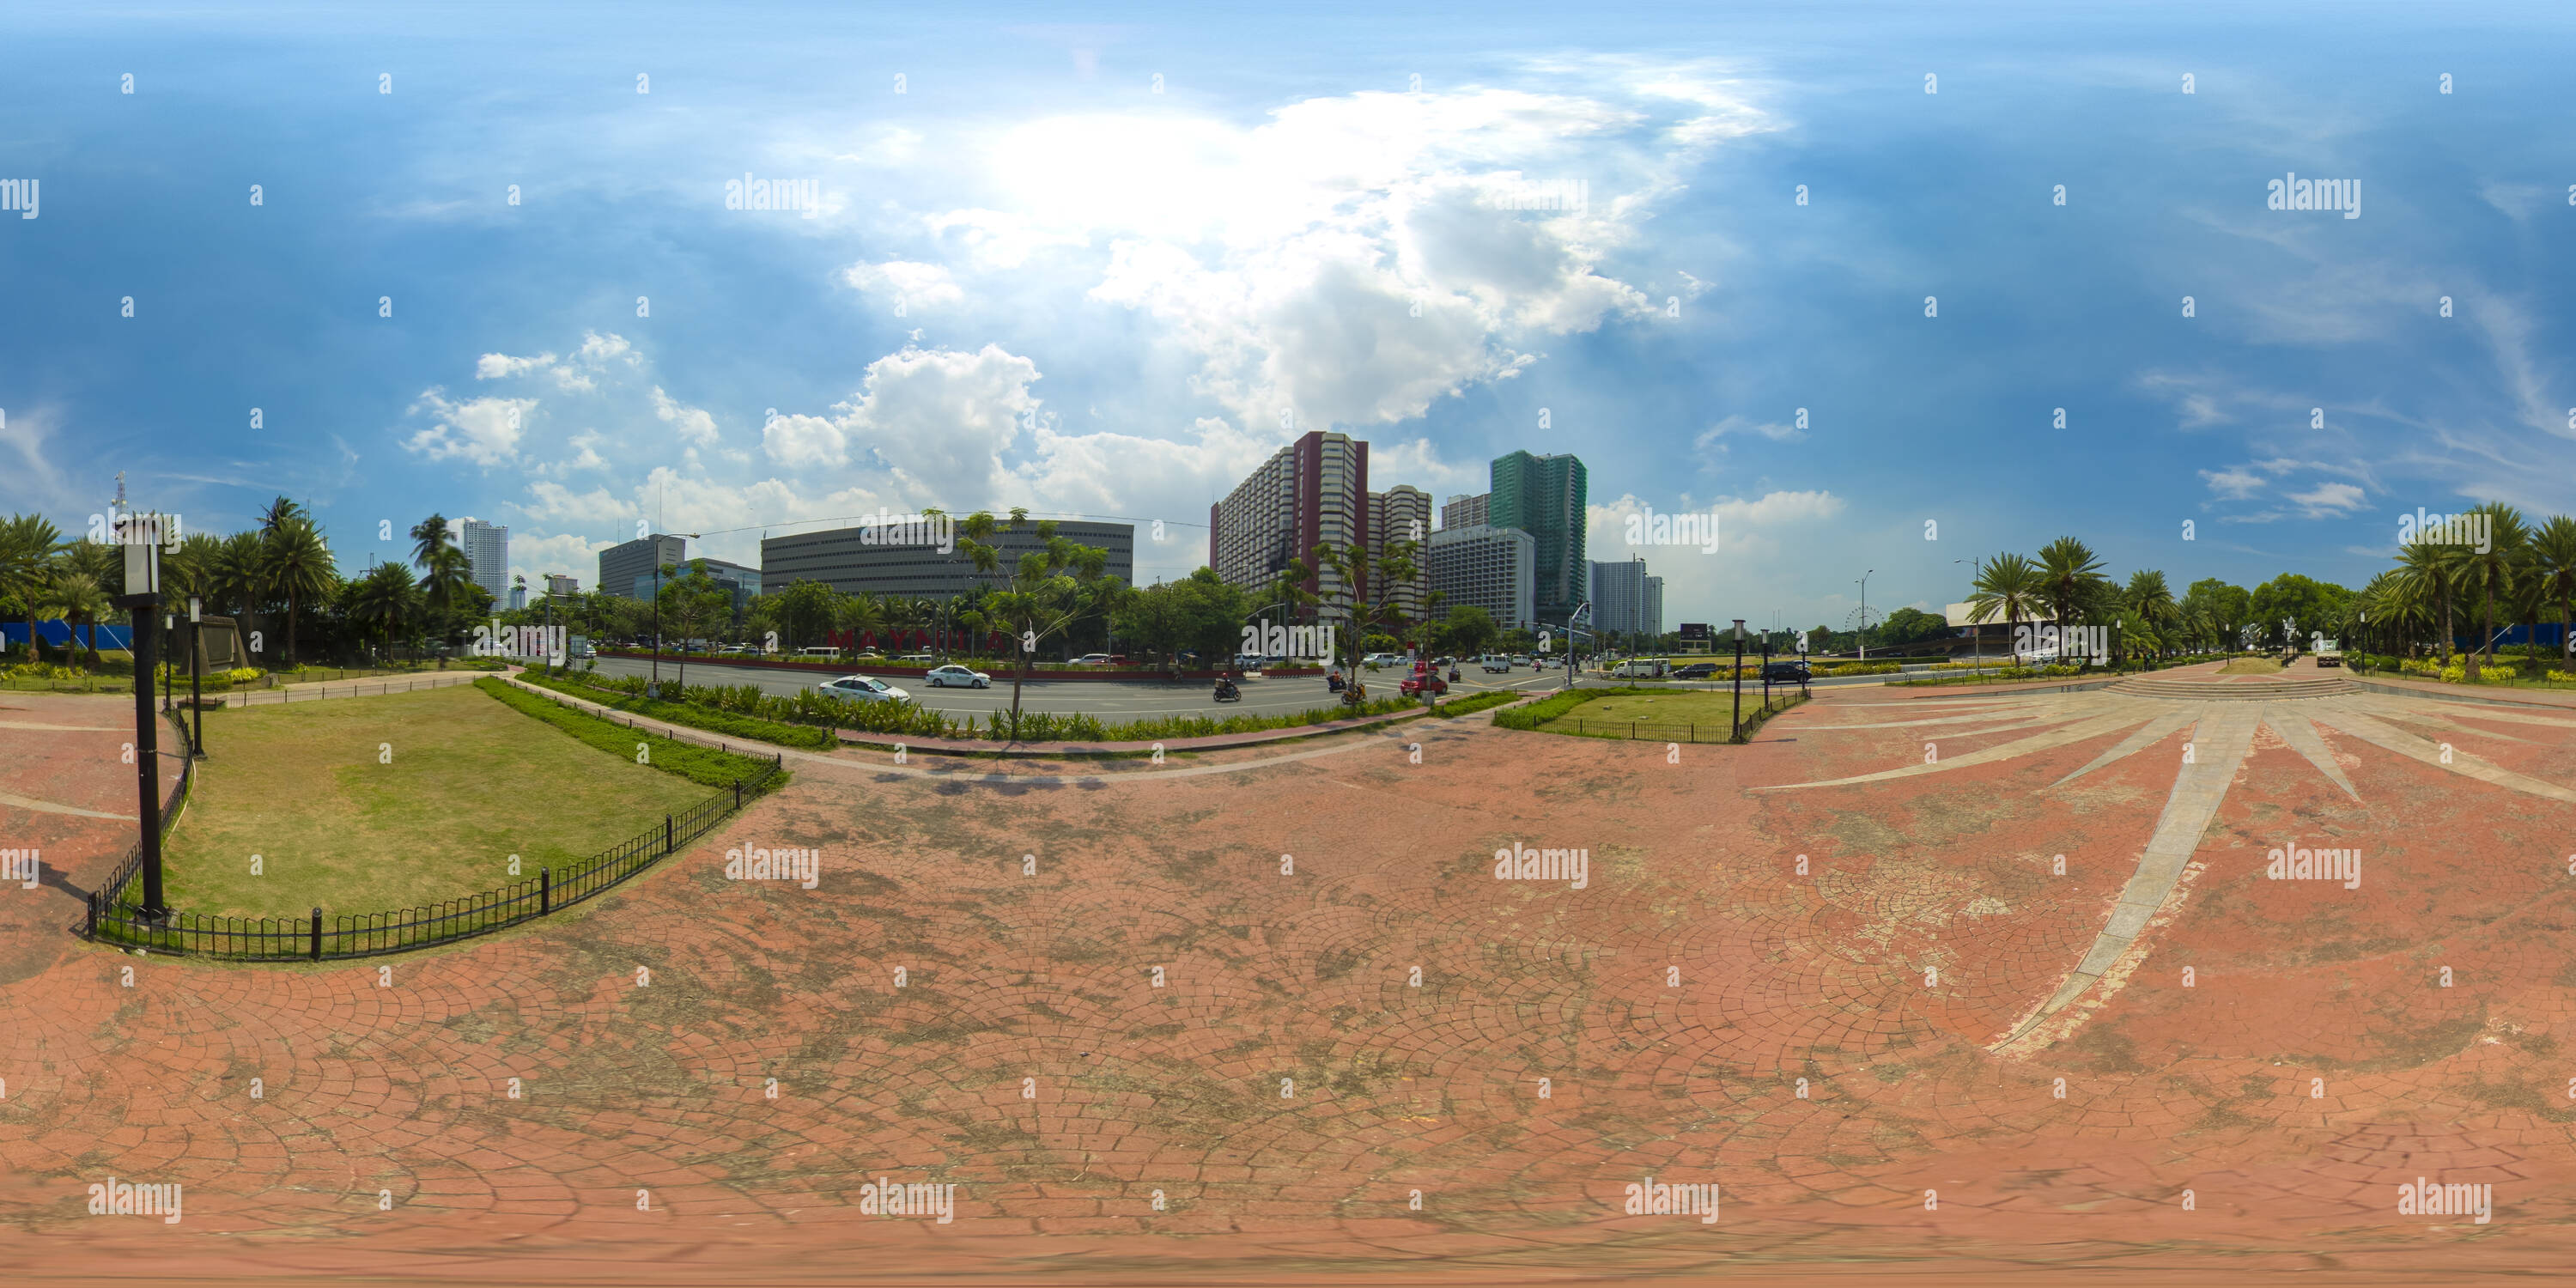 360 degree panoramic view of Manila city, the capital of the Philippines. 360-Degree view